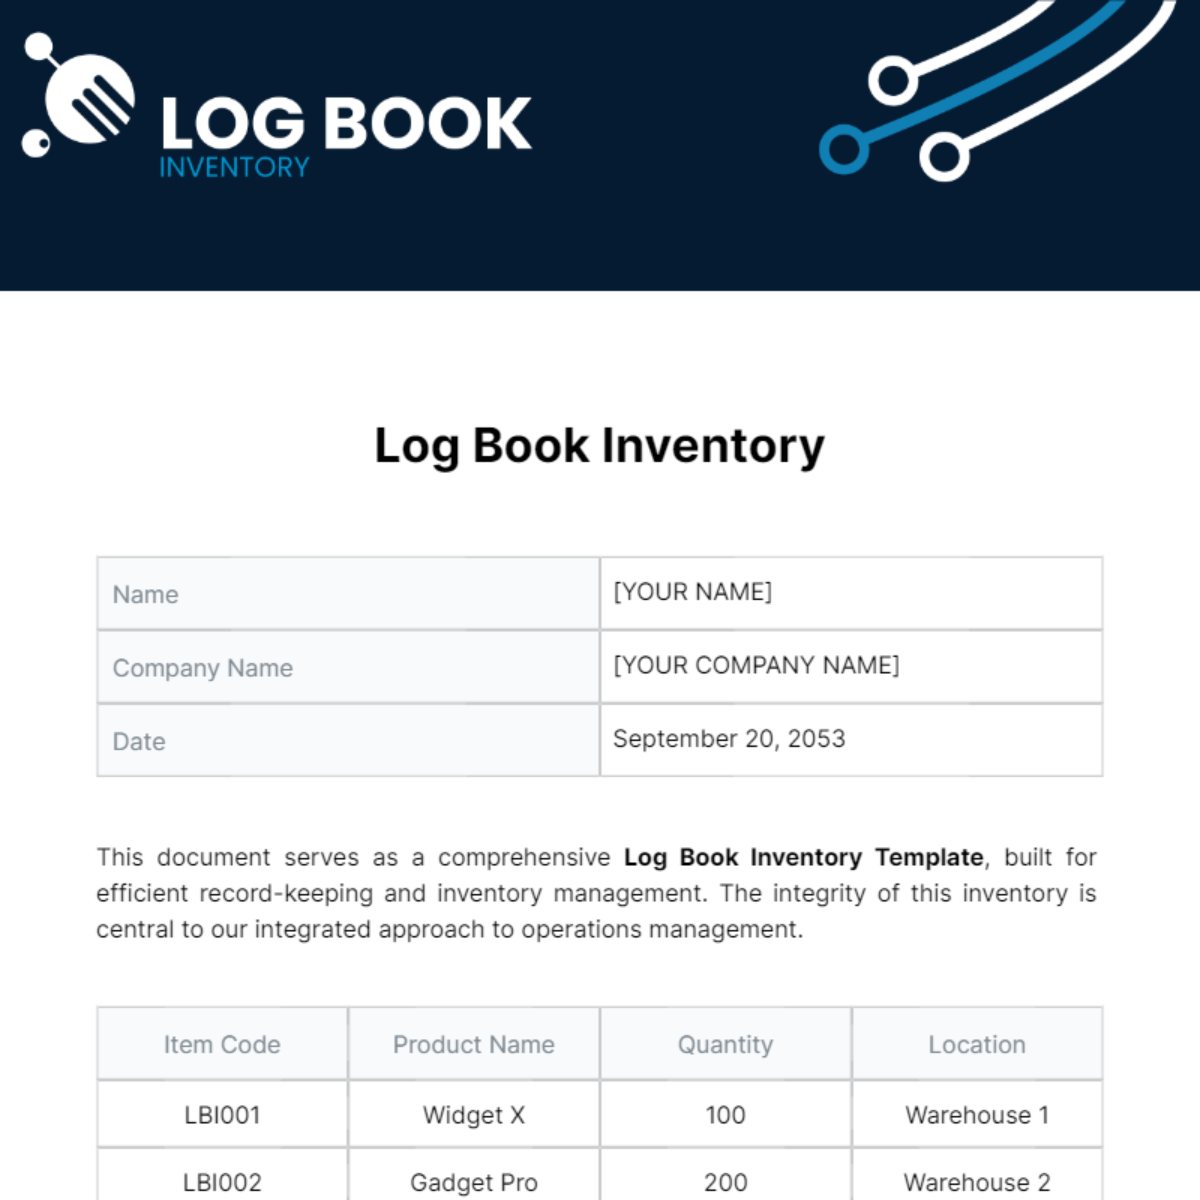 Log Book Inventory Template